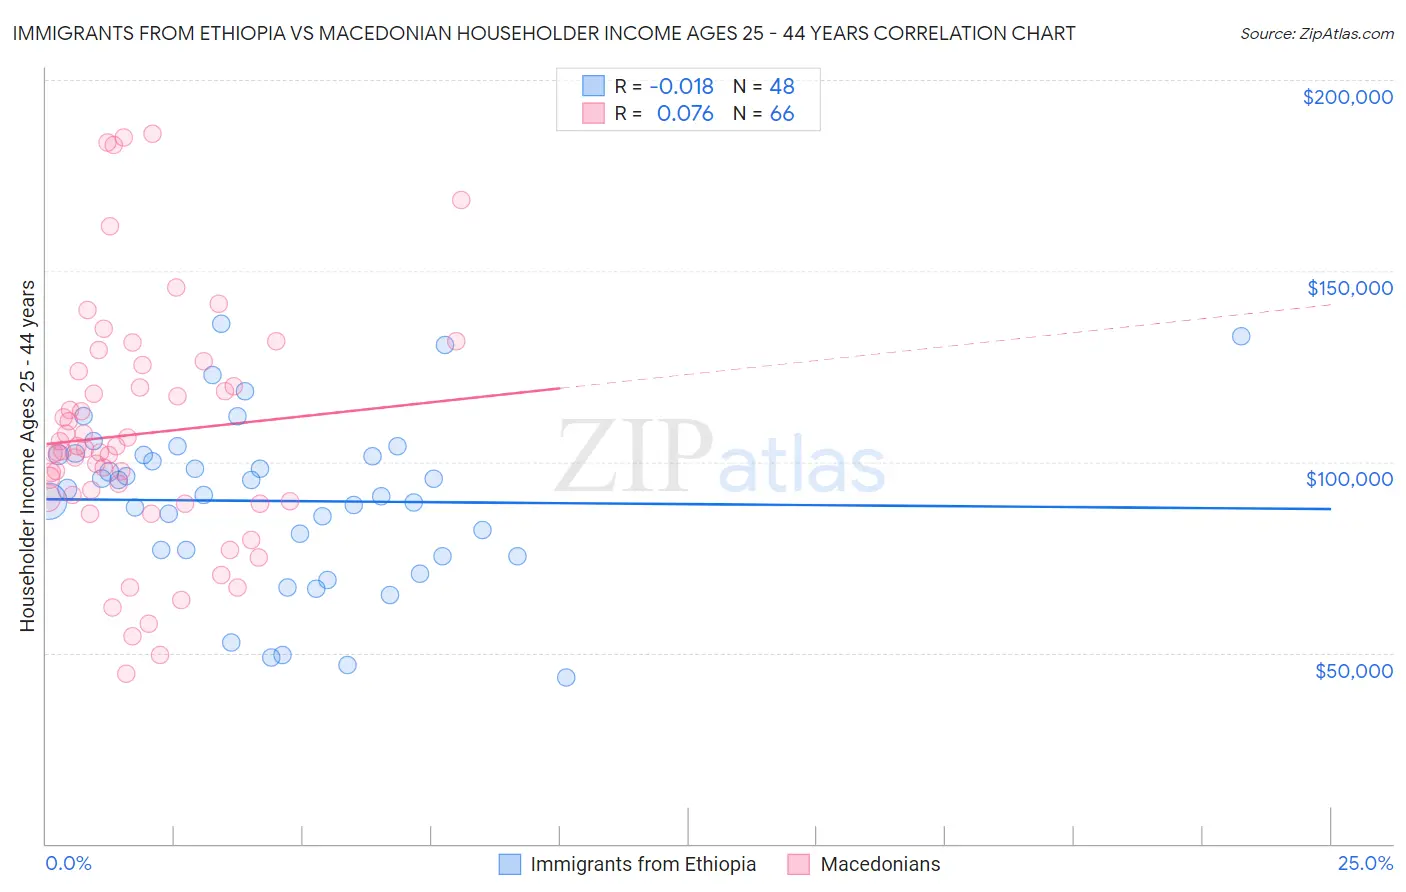 Immigrants from Ethiopia vs Macedonian Householder Income Ages 25 - 44 years